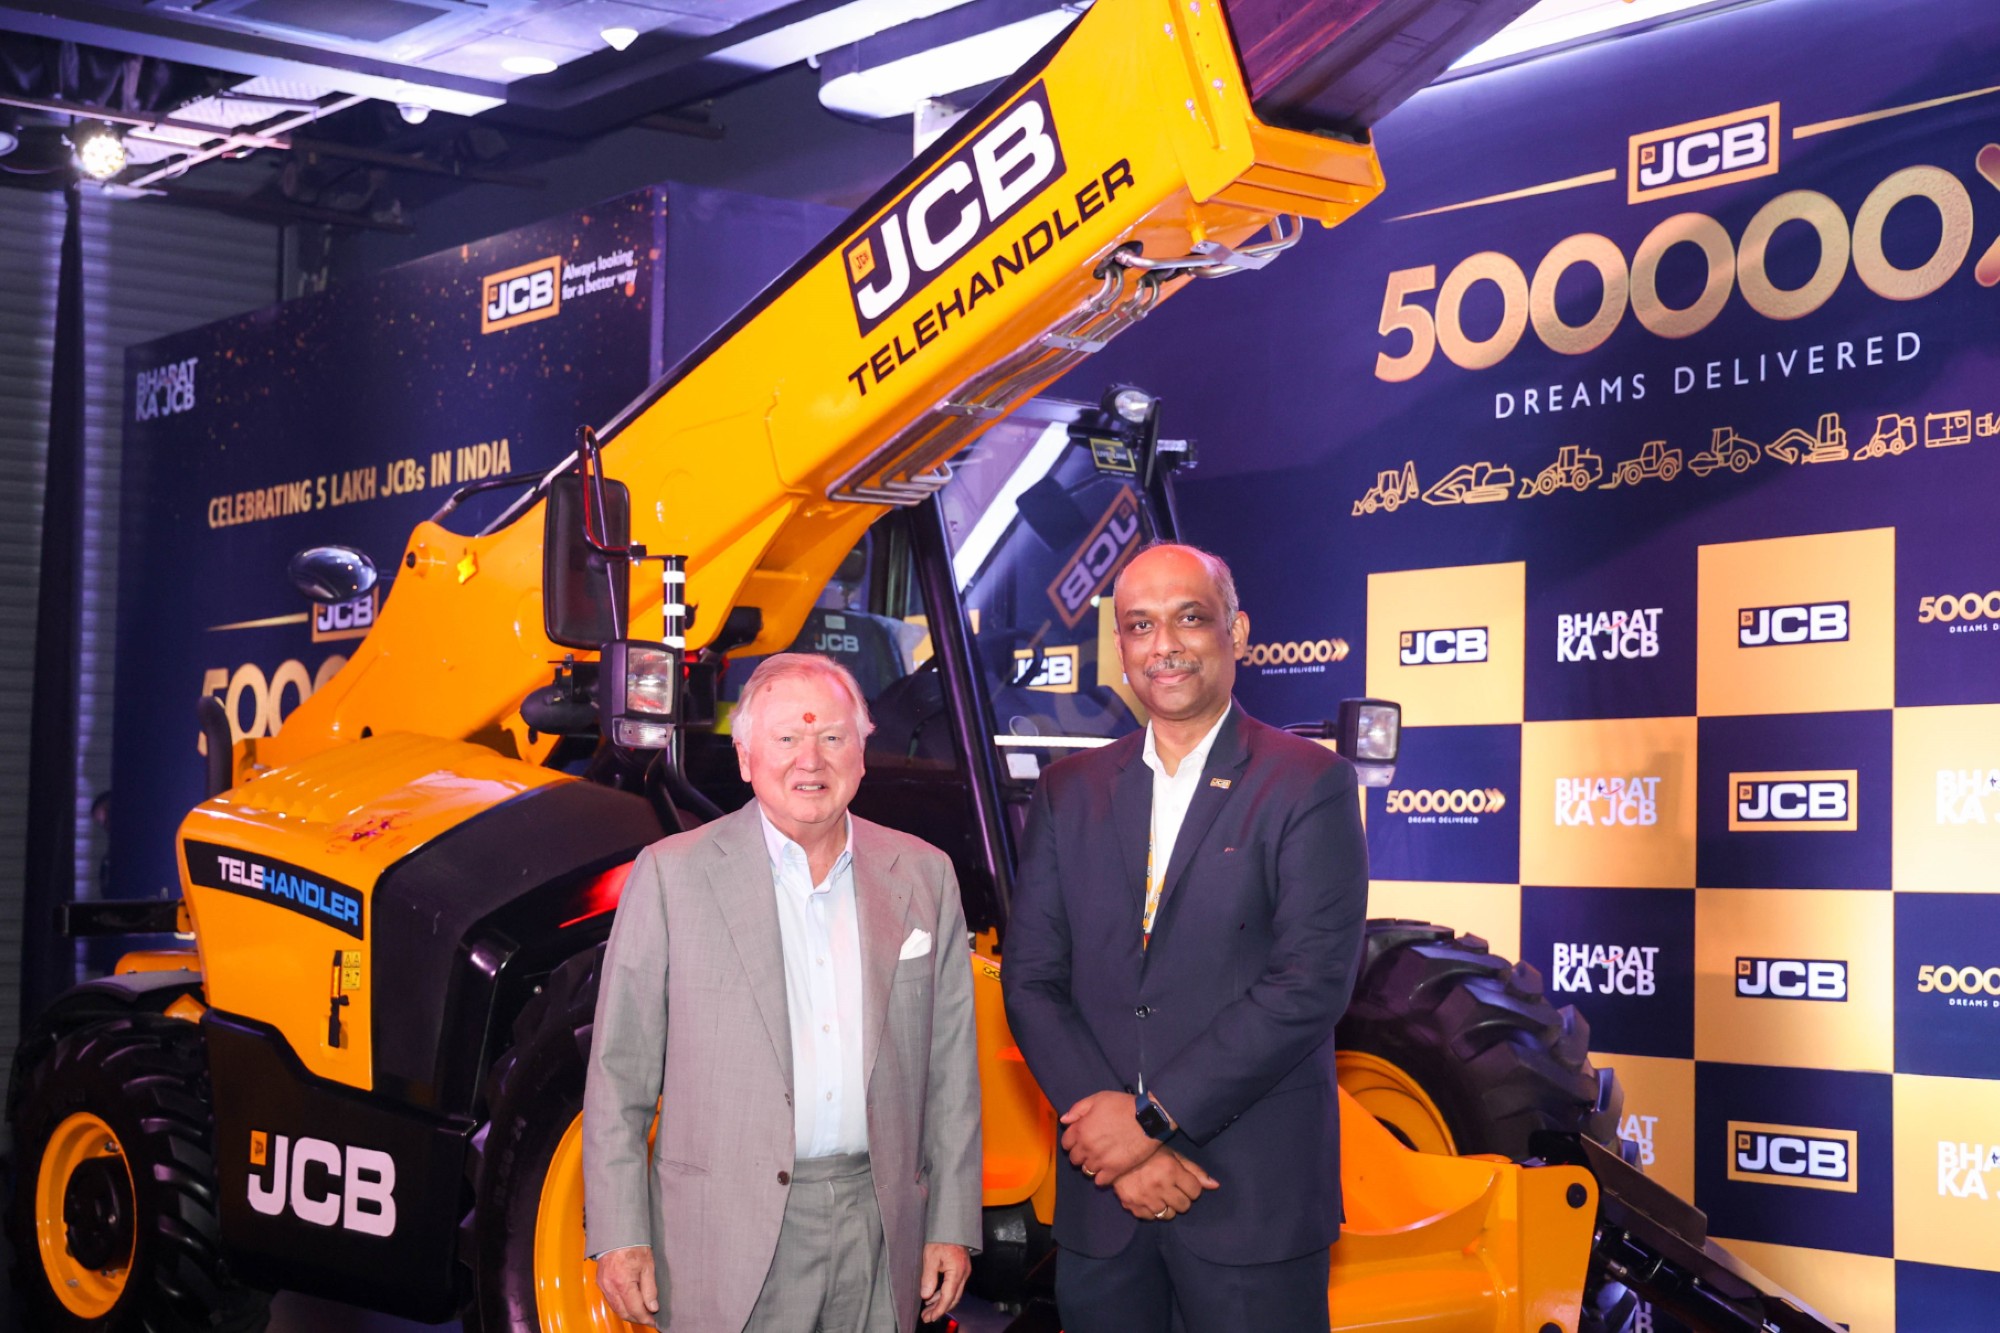 JCB India, a premier manufacturer of Earthmoving and Construction Equipment, recently celebrated a significant milestone with the production of its 500,000th Construction Equipment.